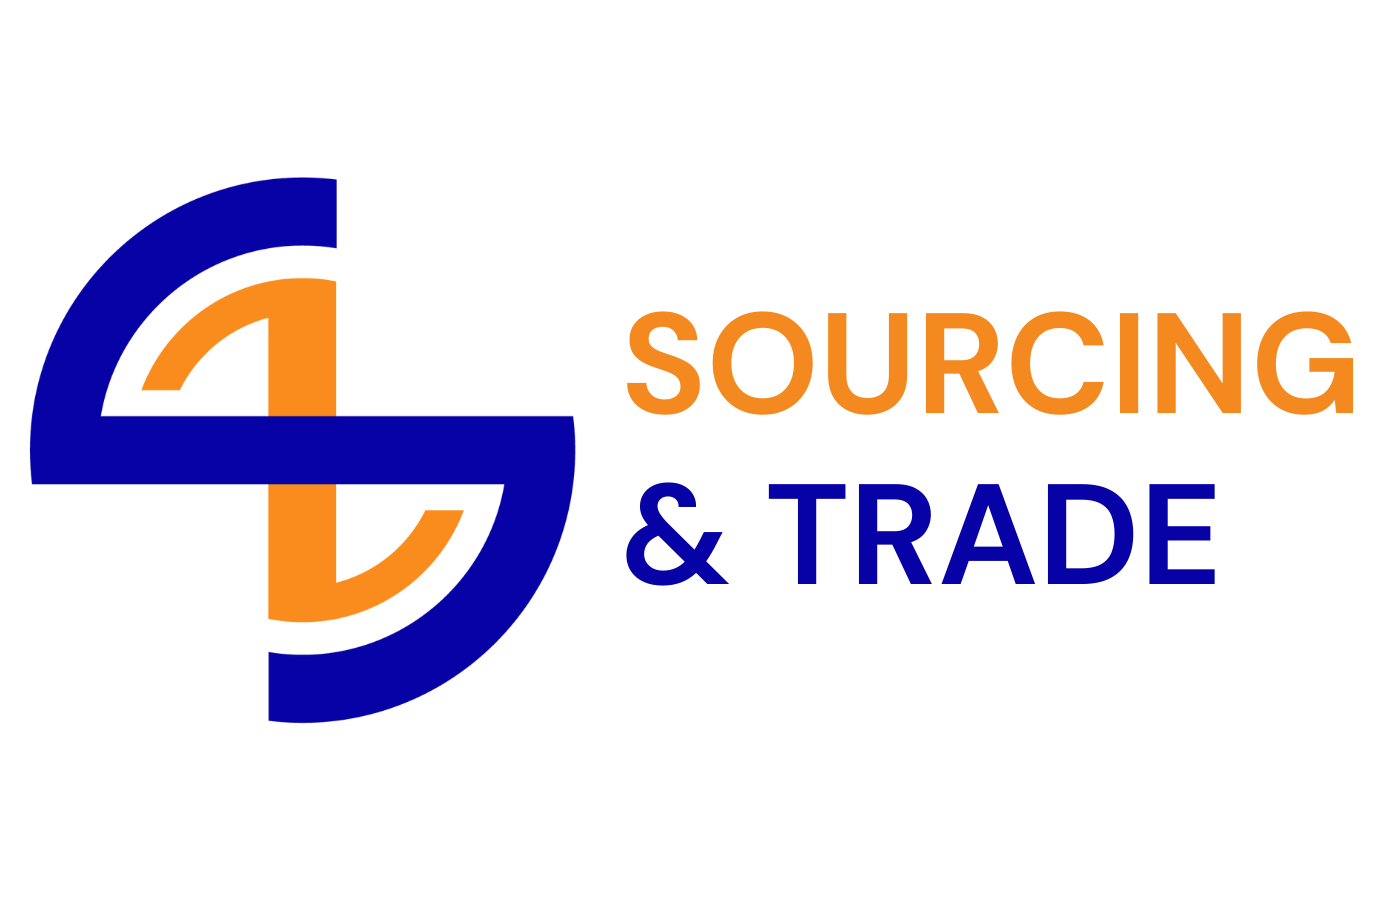 SOURCING & TRADE